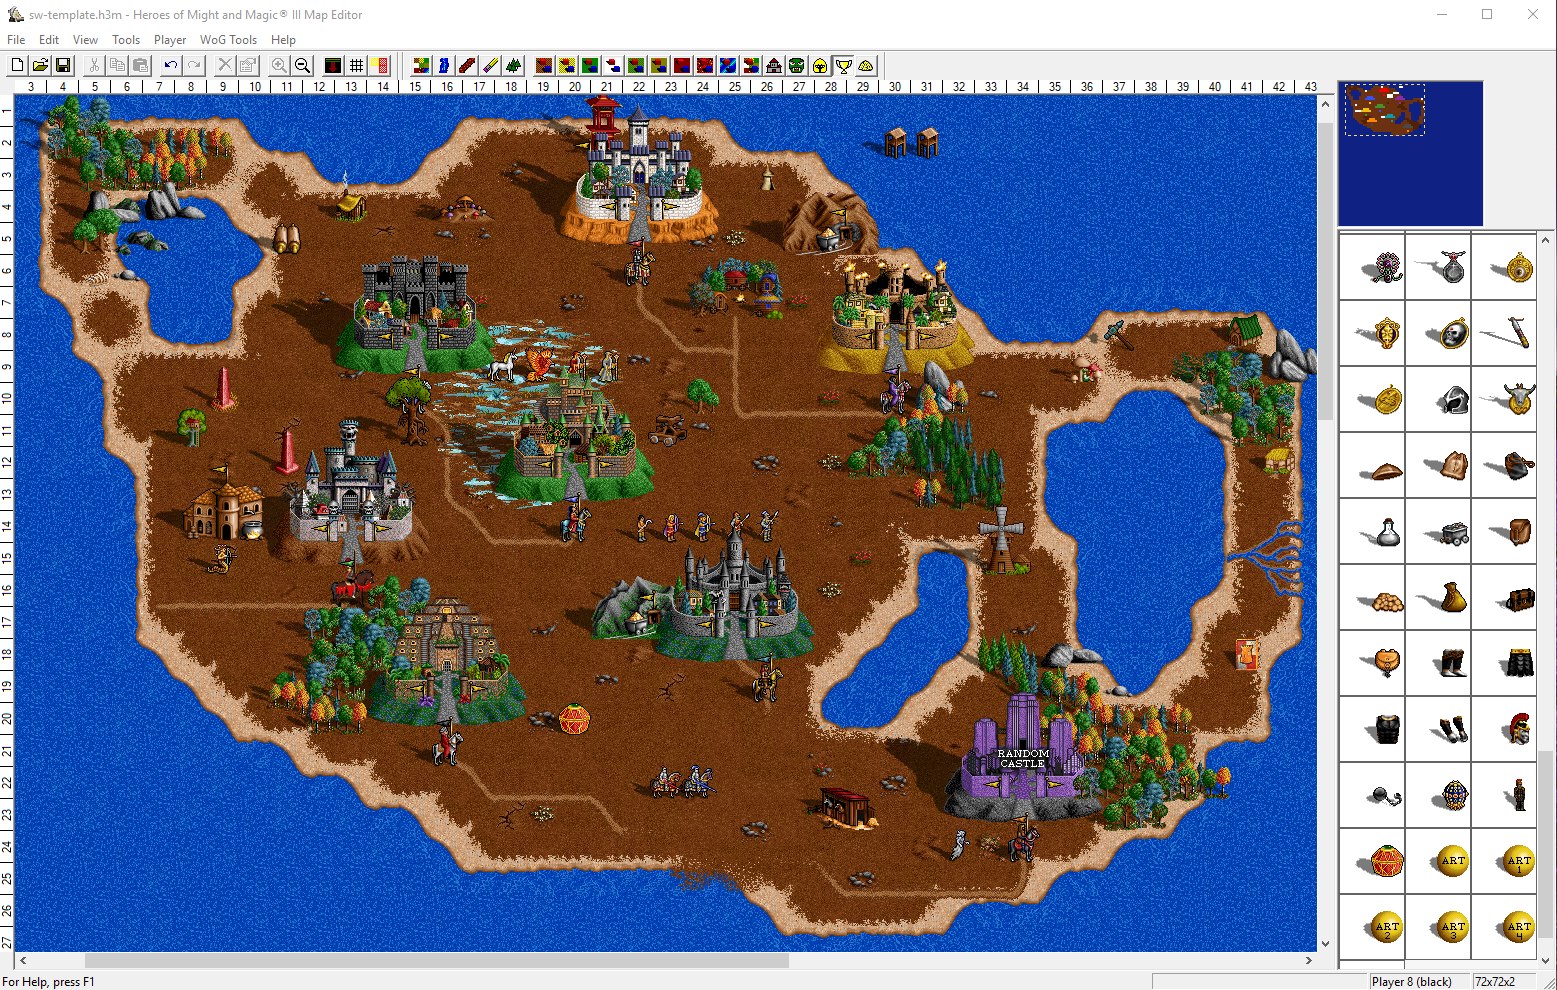 Heroes of might and magic 3 карты. Heroes of might and Magic карта Энрота. Heroes of might and Magic 2 карты. Might and Magic 1 карта.